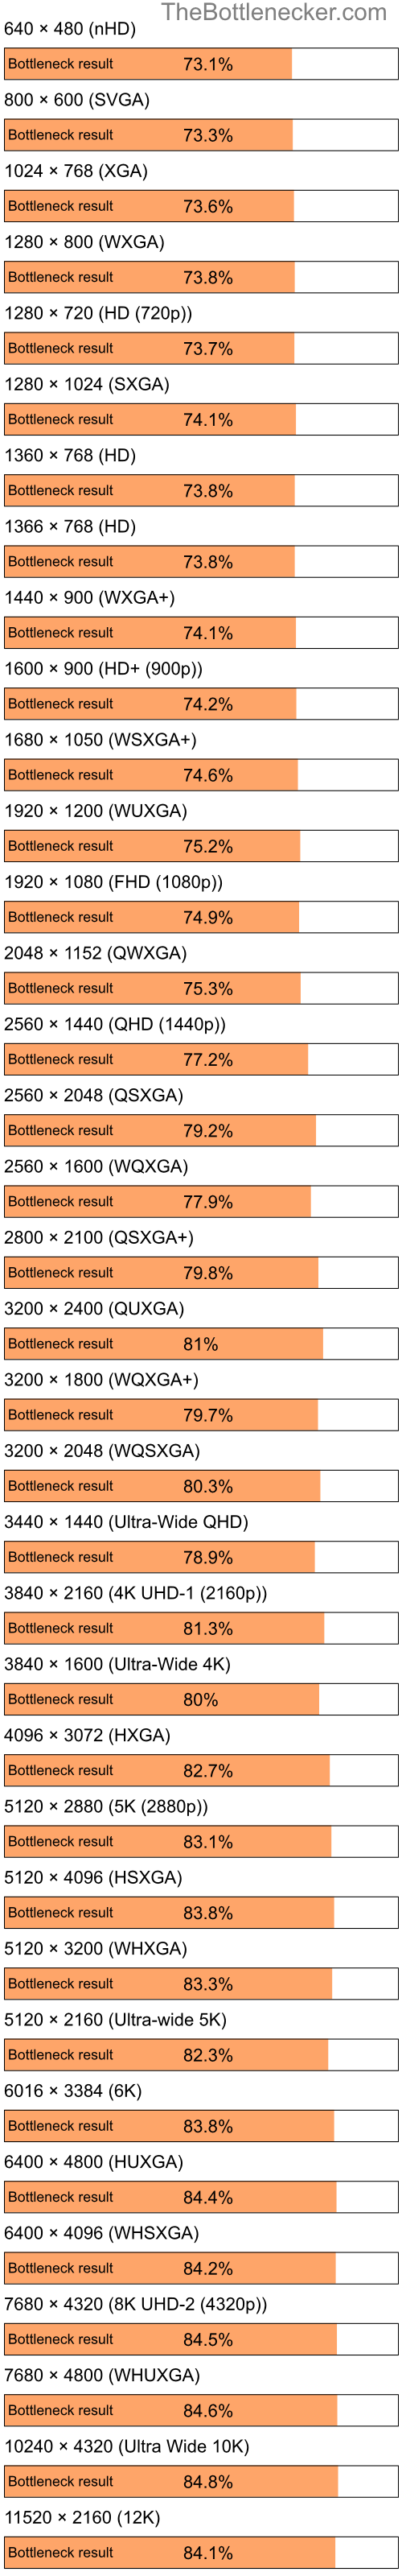 Bottleneck results by resolution for Intel Atom Z520 and AMD Mobility Radeon XPRESS 200 in Processor Intense Tasks